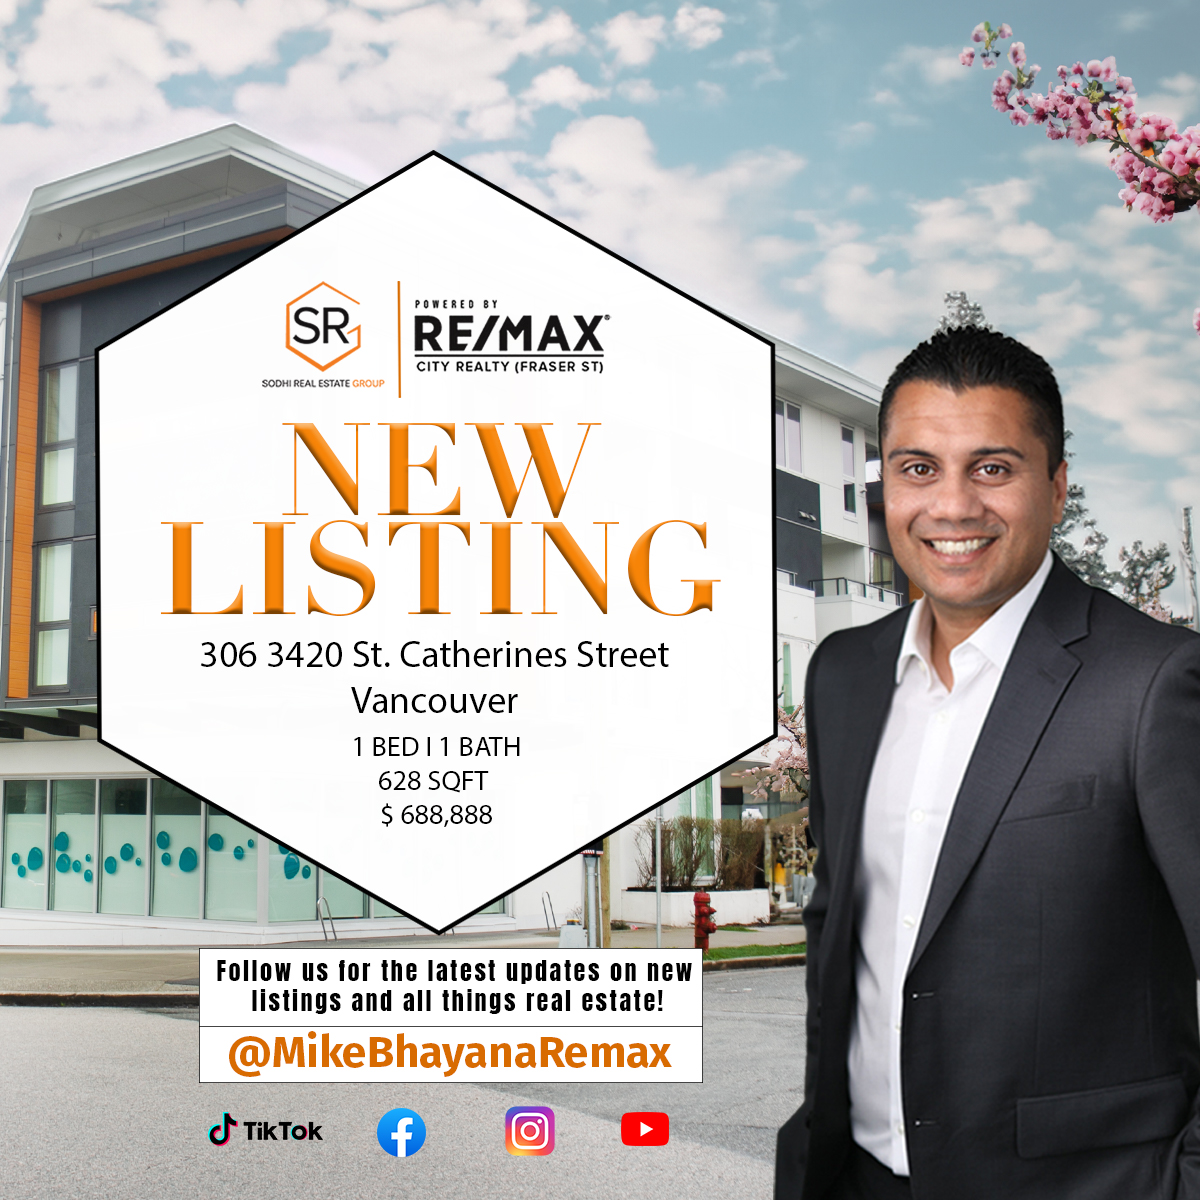 🎉NEW LISTING ALERT! 🏚

📍306 3420 St Catherine Street Vancouver

⏰Team SRG Powered by Remix 🌟

#NewListing
#vancouveragents #vancouverbc
#duplex #remaxagent #remaxagents
#remaxapproved 
#buywithus #buyersmarket #realestate#remaxhustle
#remaxcollection #Srgremax #Srgre